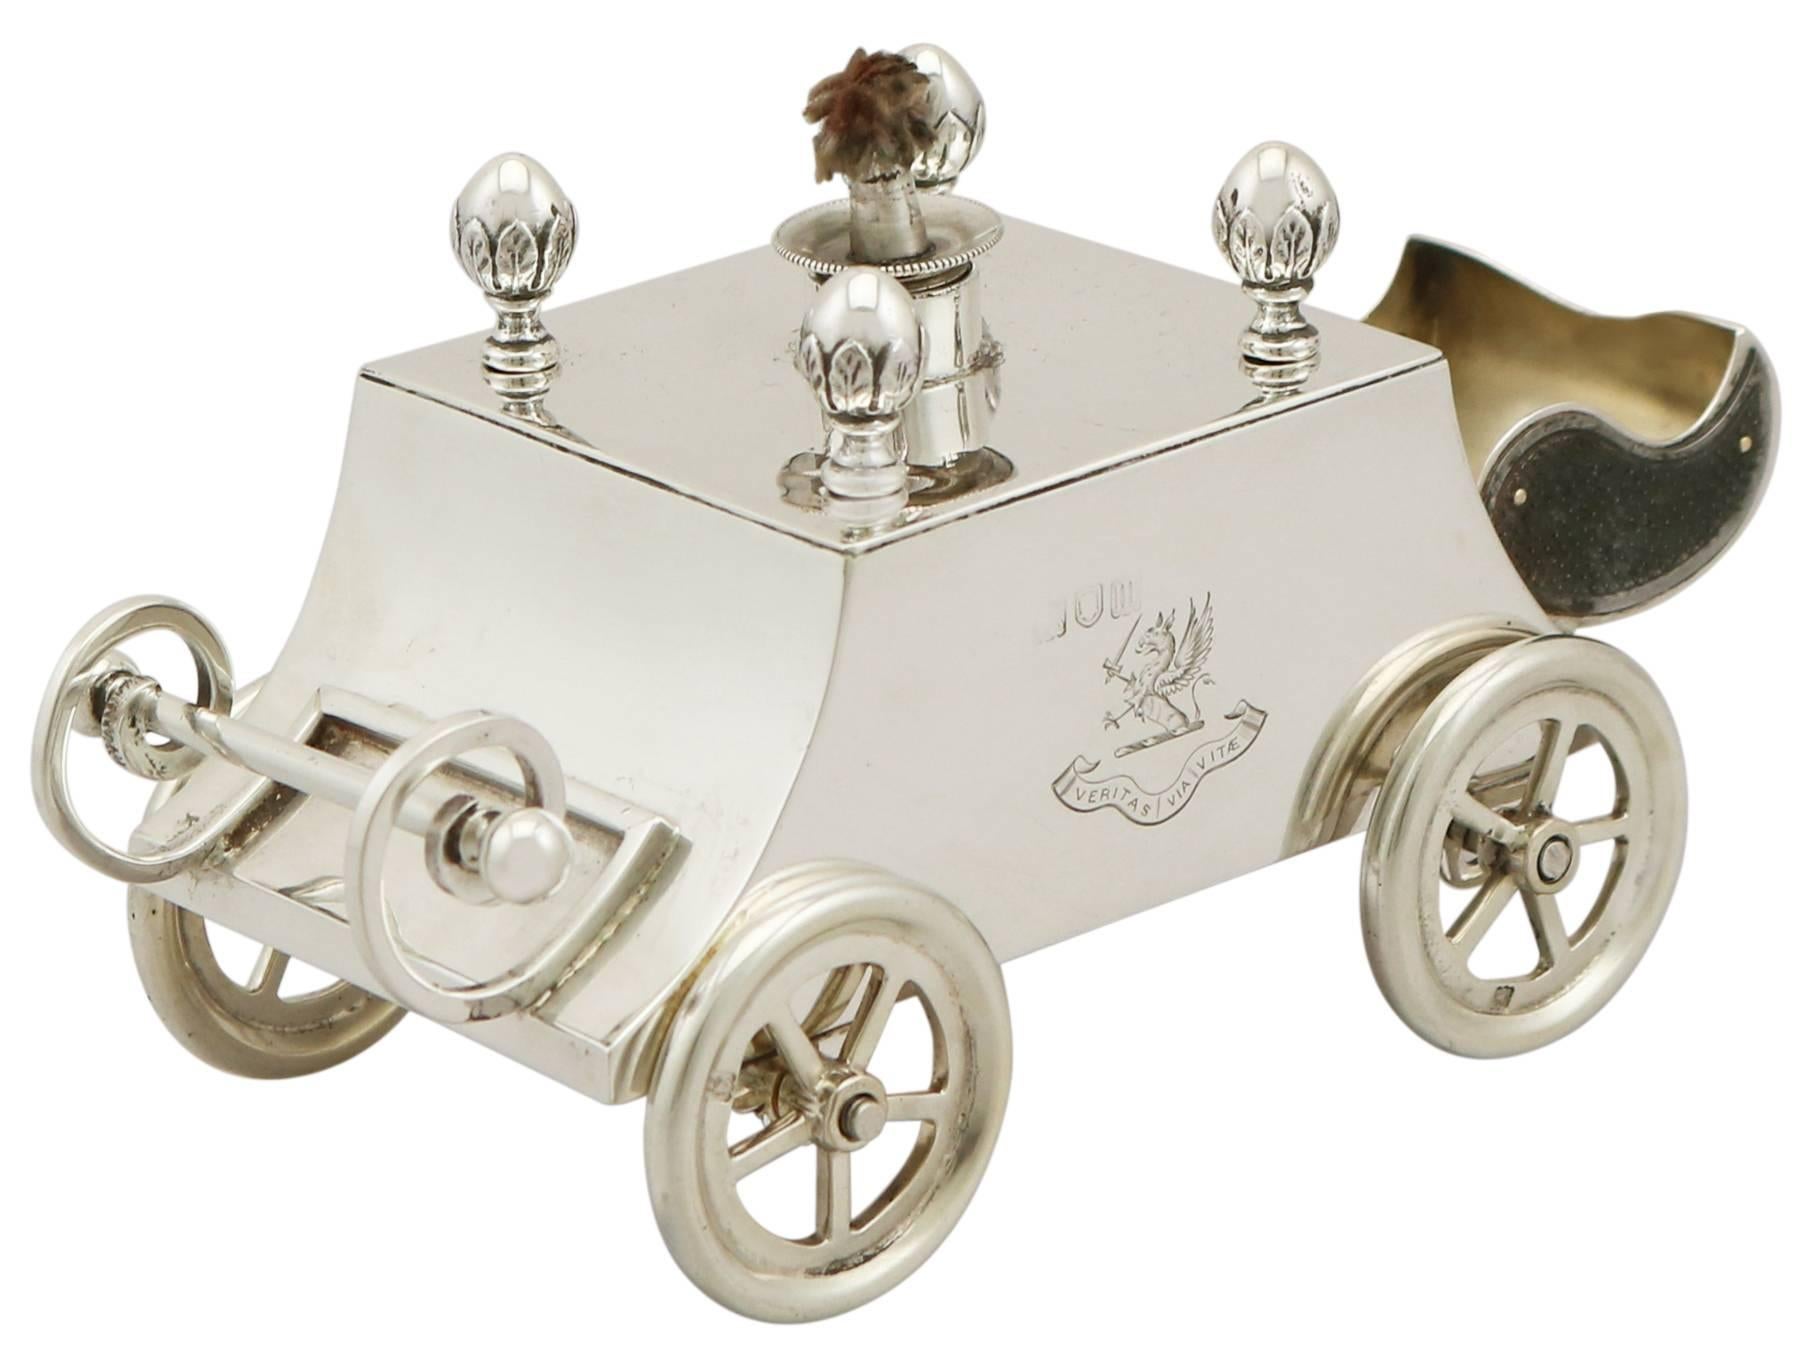 An exceptional, fine, impressive and unusual antique Edwardian English sterling silver table lighter modelled in the form of a 'carriage'; an addition to our maritime silverware collection.

This exceptional antique Edwardian sterling silver table